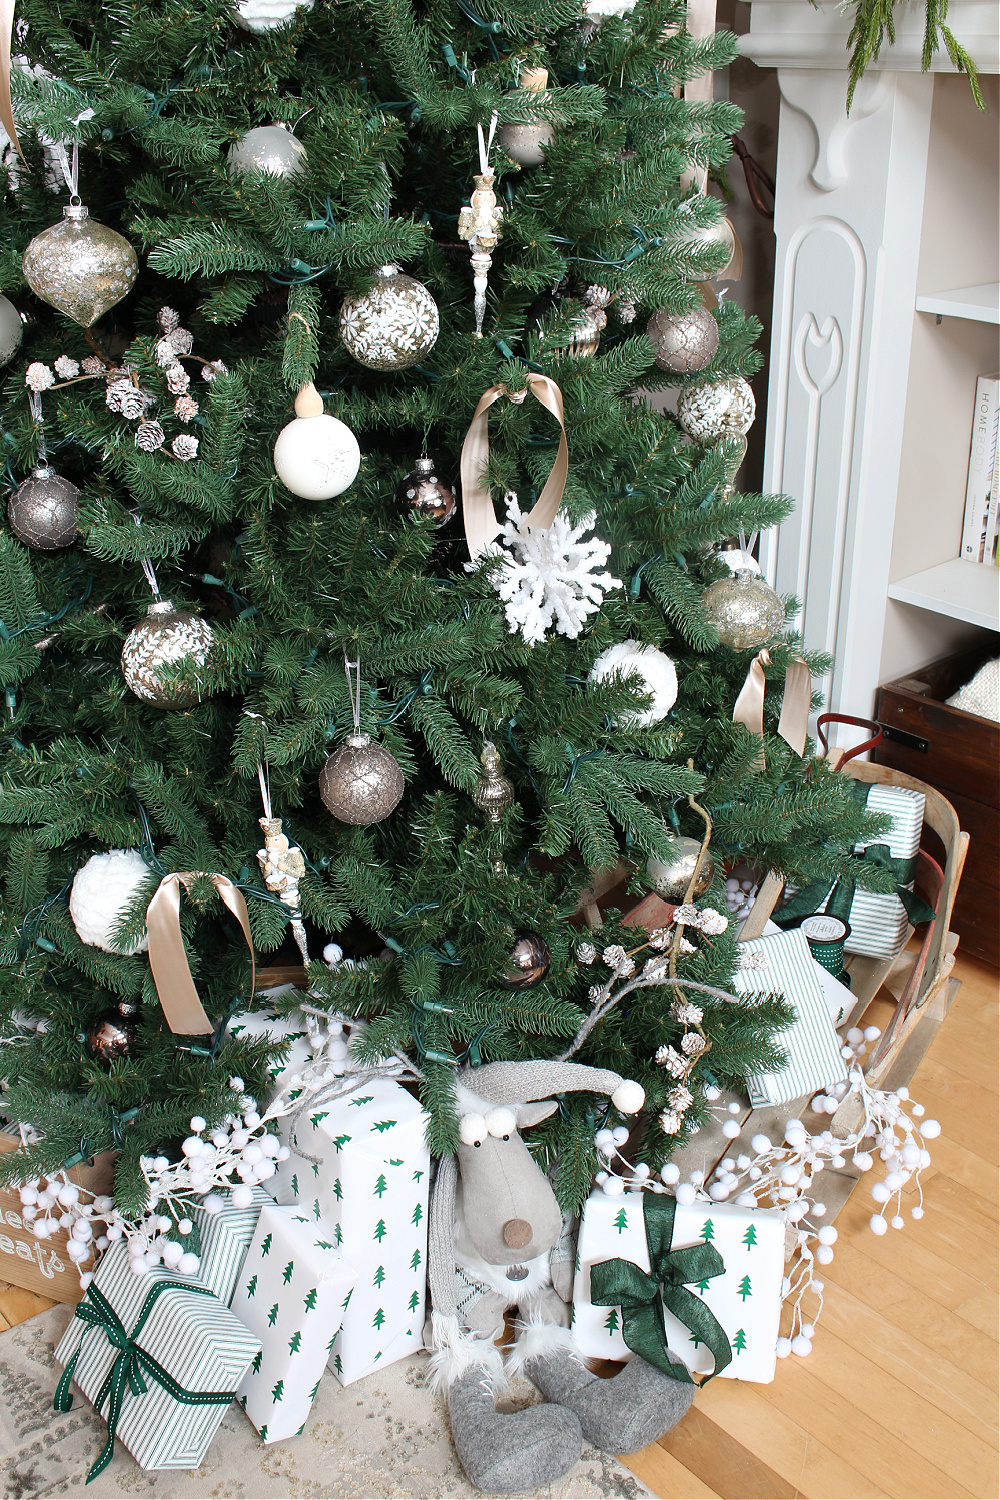 Christmas tree decorated with presents wrapped in green and white.